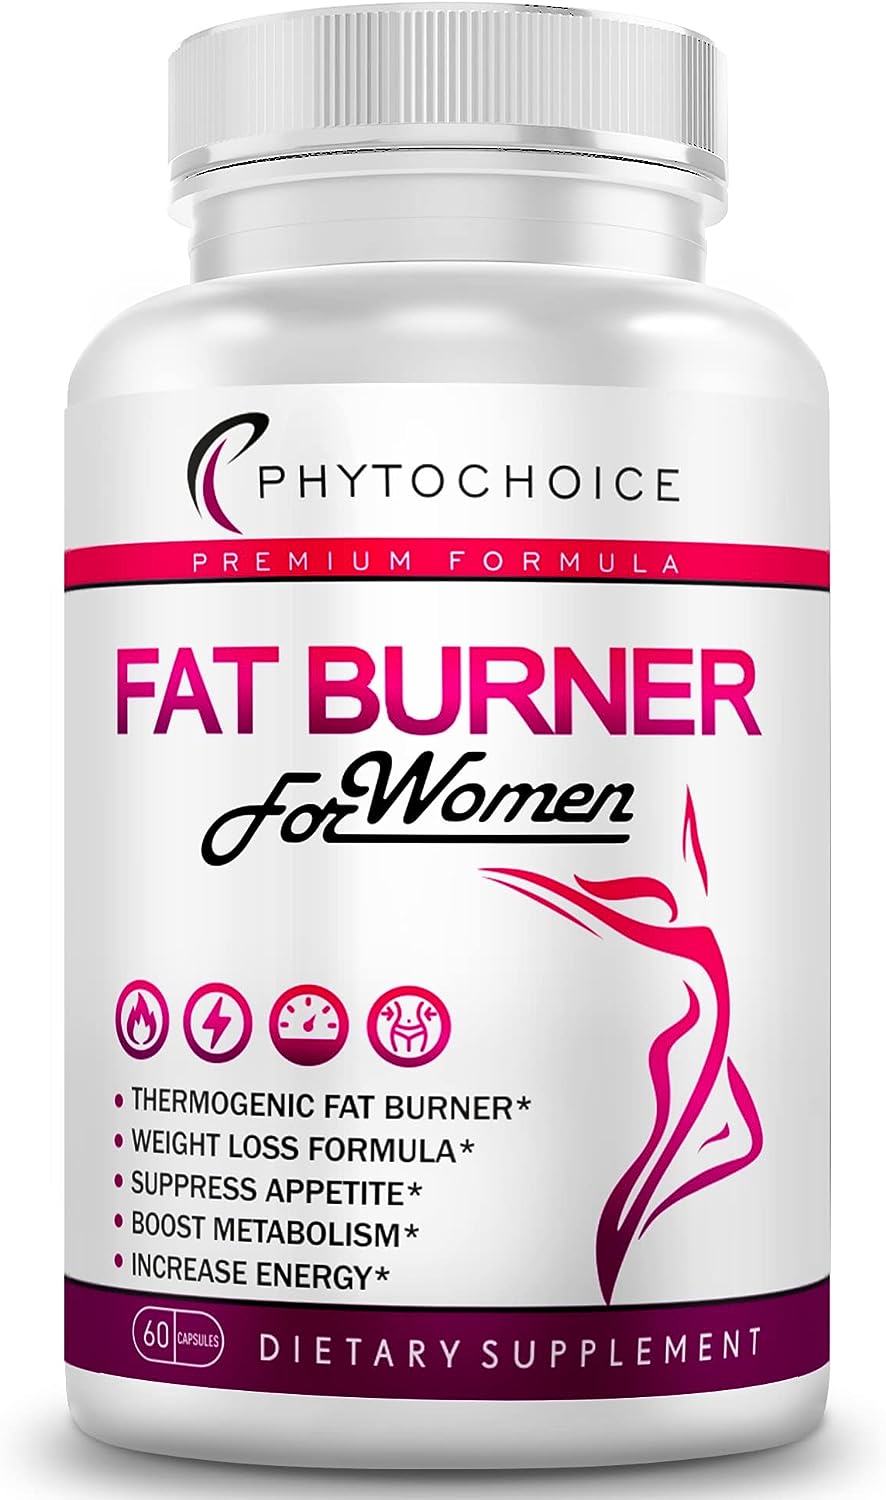 Best Diet Pills that Work Fast for Women-Natural Weight Loss Supplements-Thermogenic Burning for Women-Appetite Suppressant Carbohydrate Blocker Metabolism Booster-Belly Fat Burner